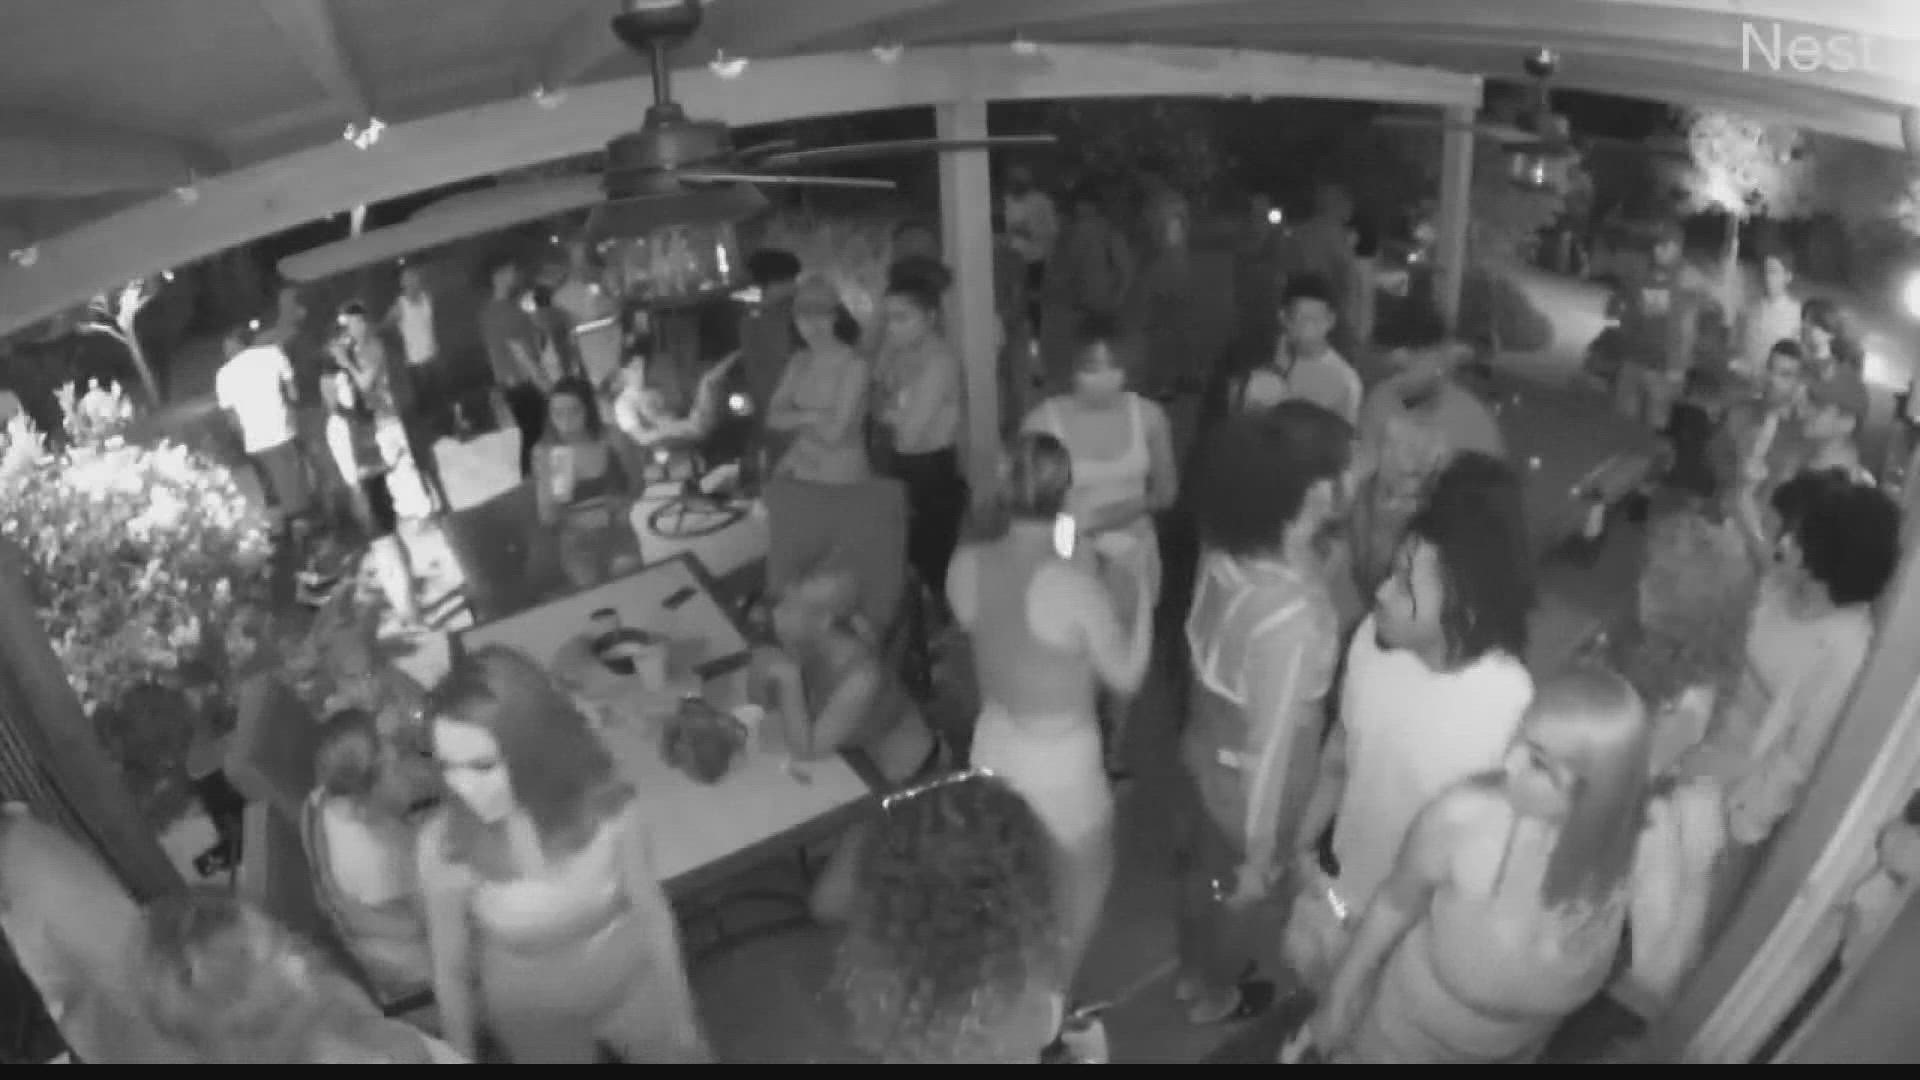 Rude renters throwing massive parties may be a thing of the past in Scottsdale.